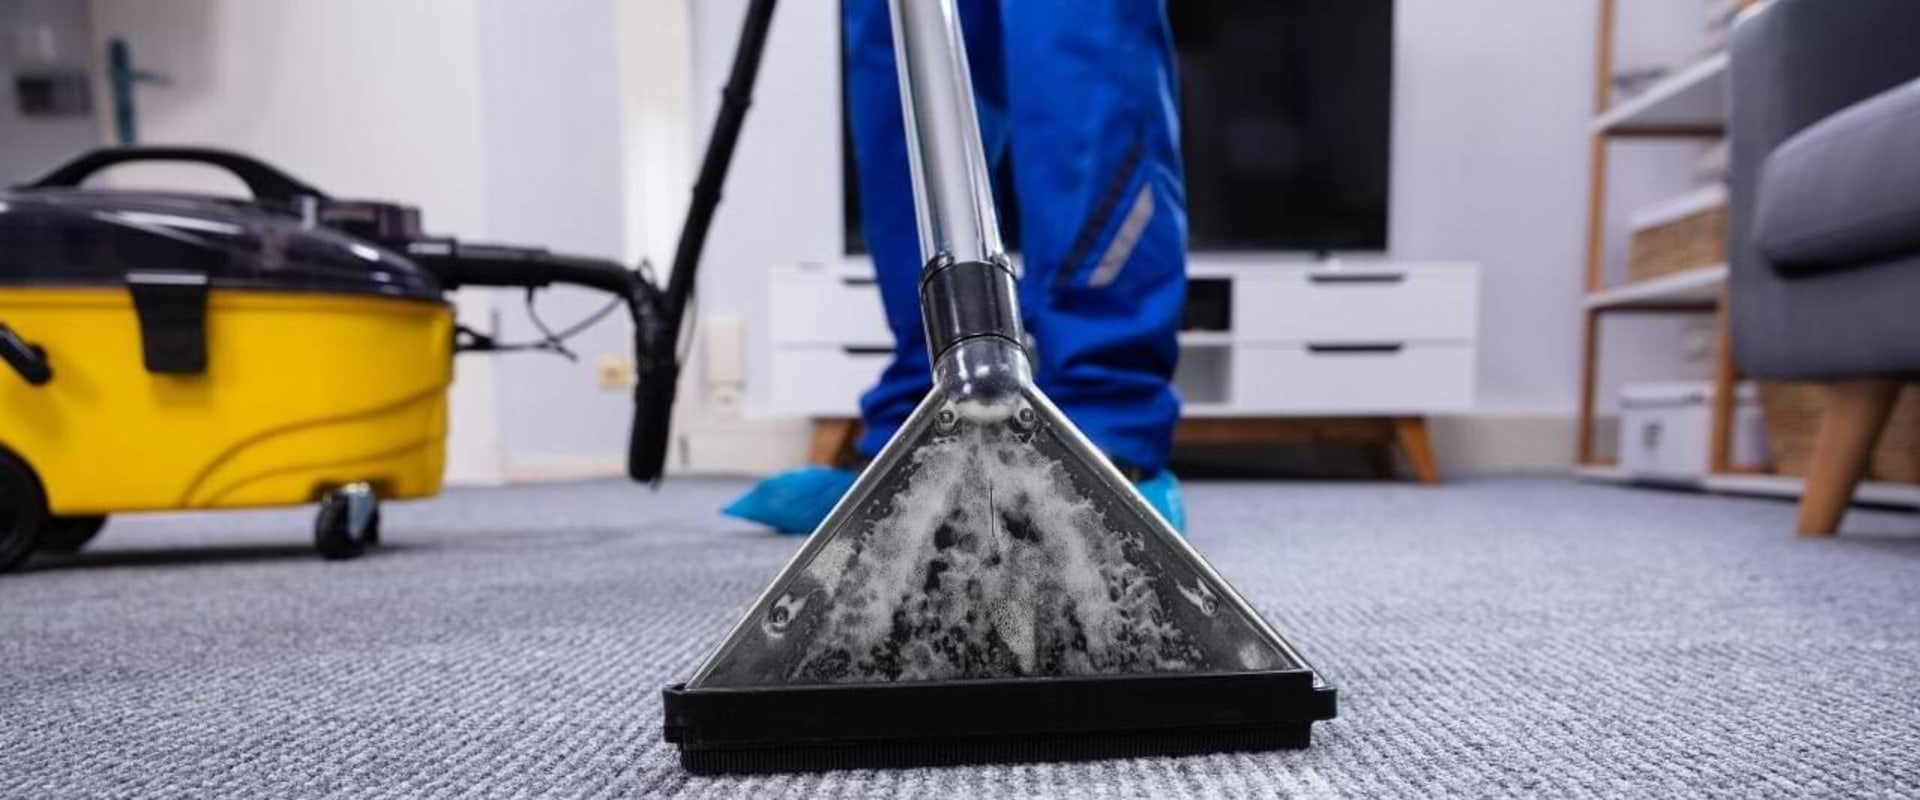 Carpet Cleaning: Everything You Need To Know